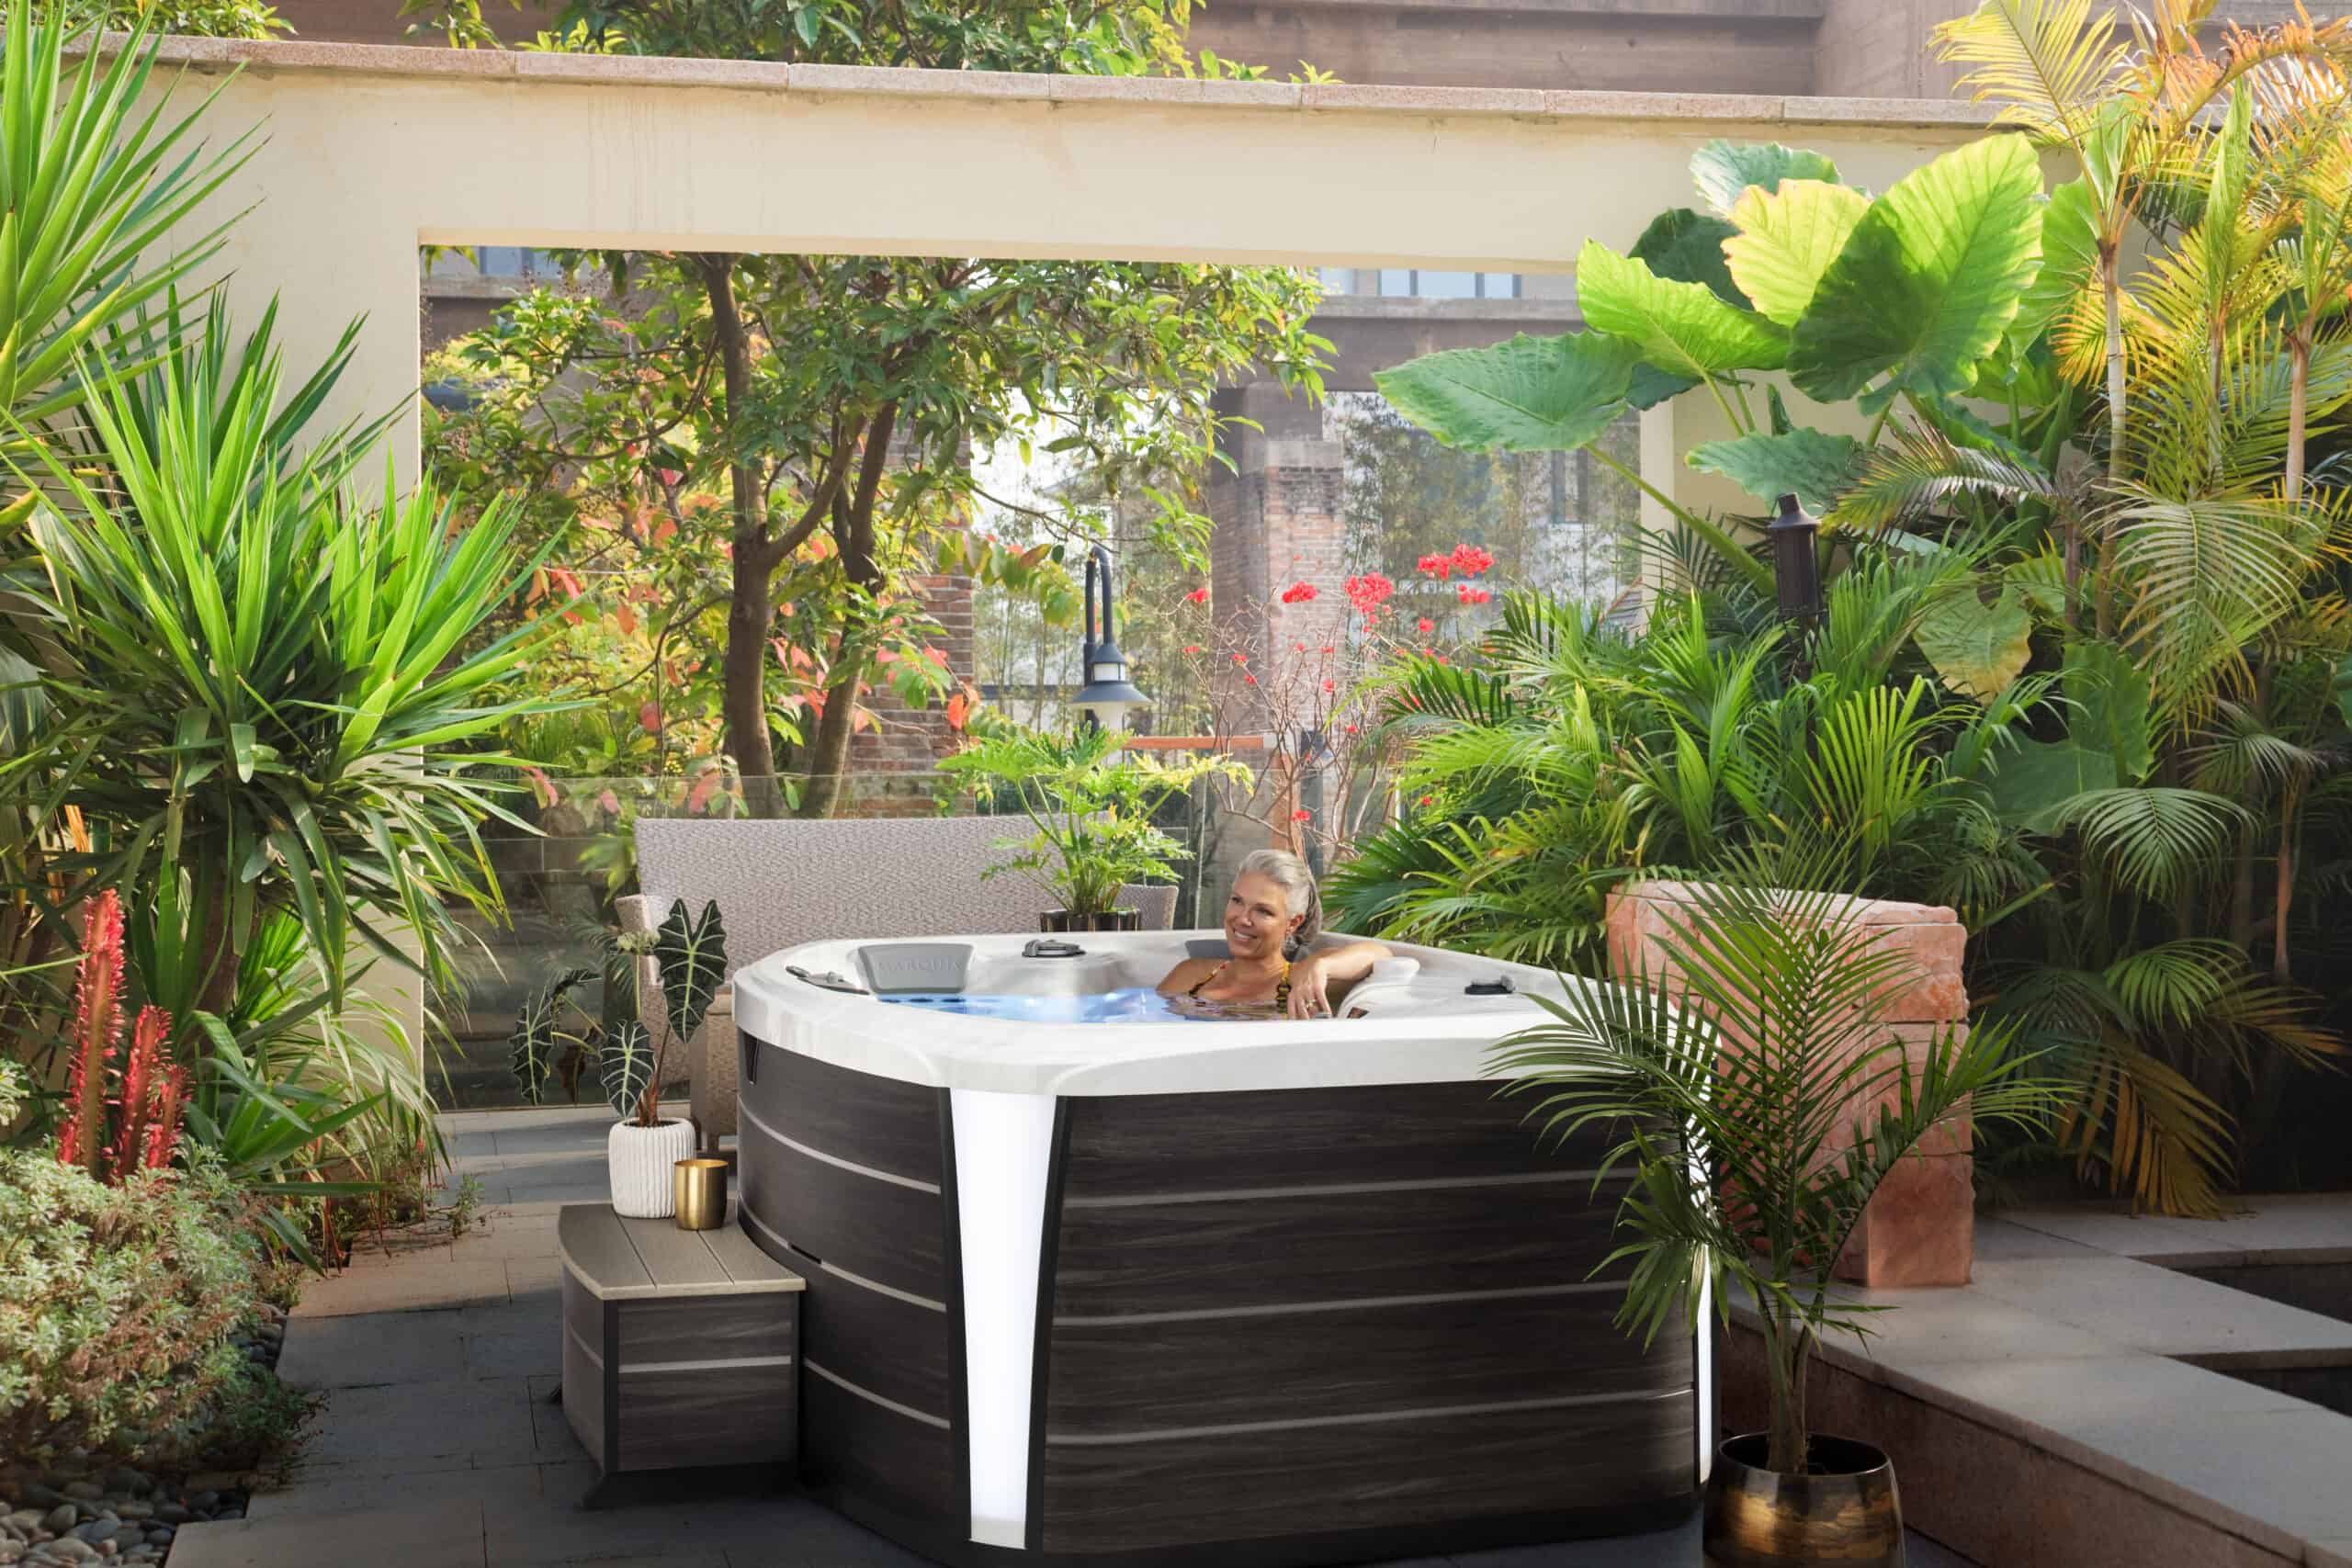 A woman is sitting in a hot tub practicing hot tub relaxation techniques by using the jets. The hot tub is surrounded by plants.